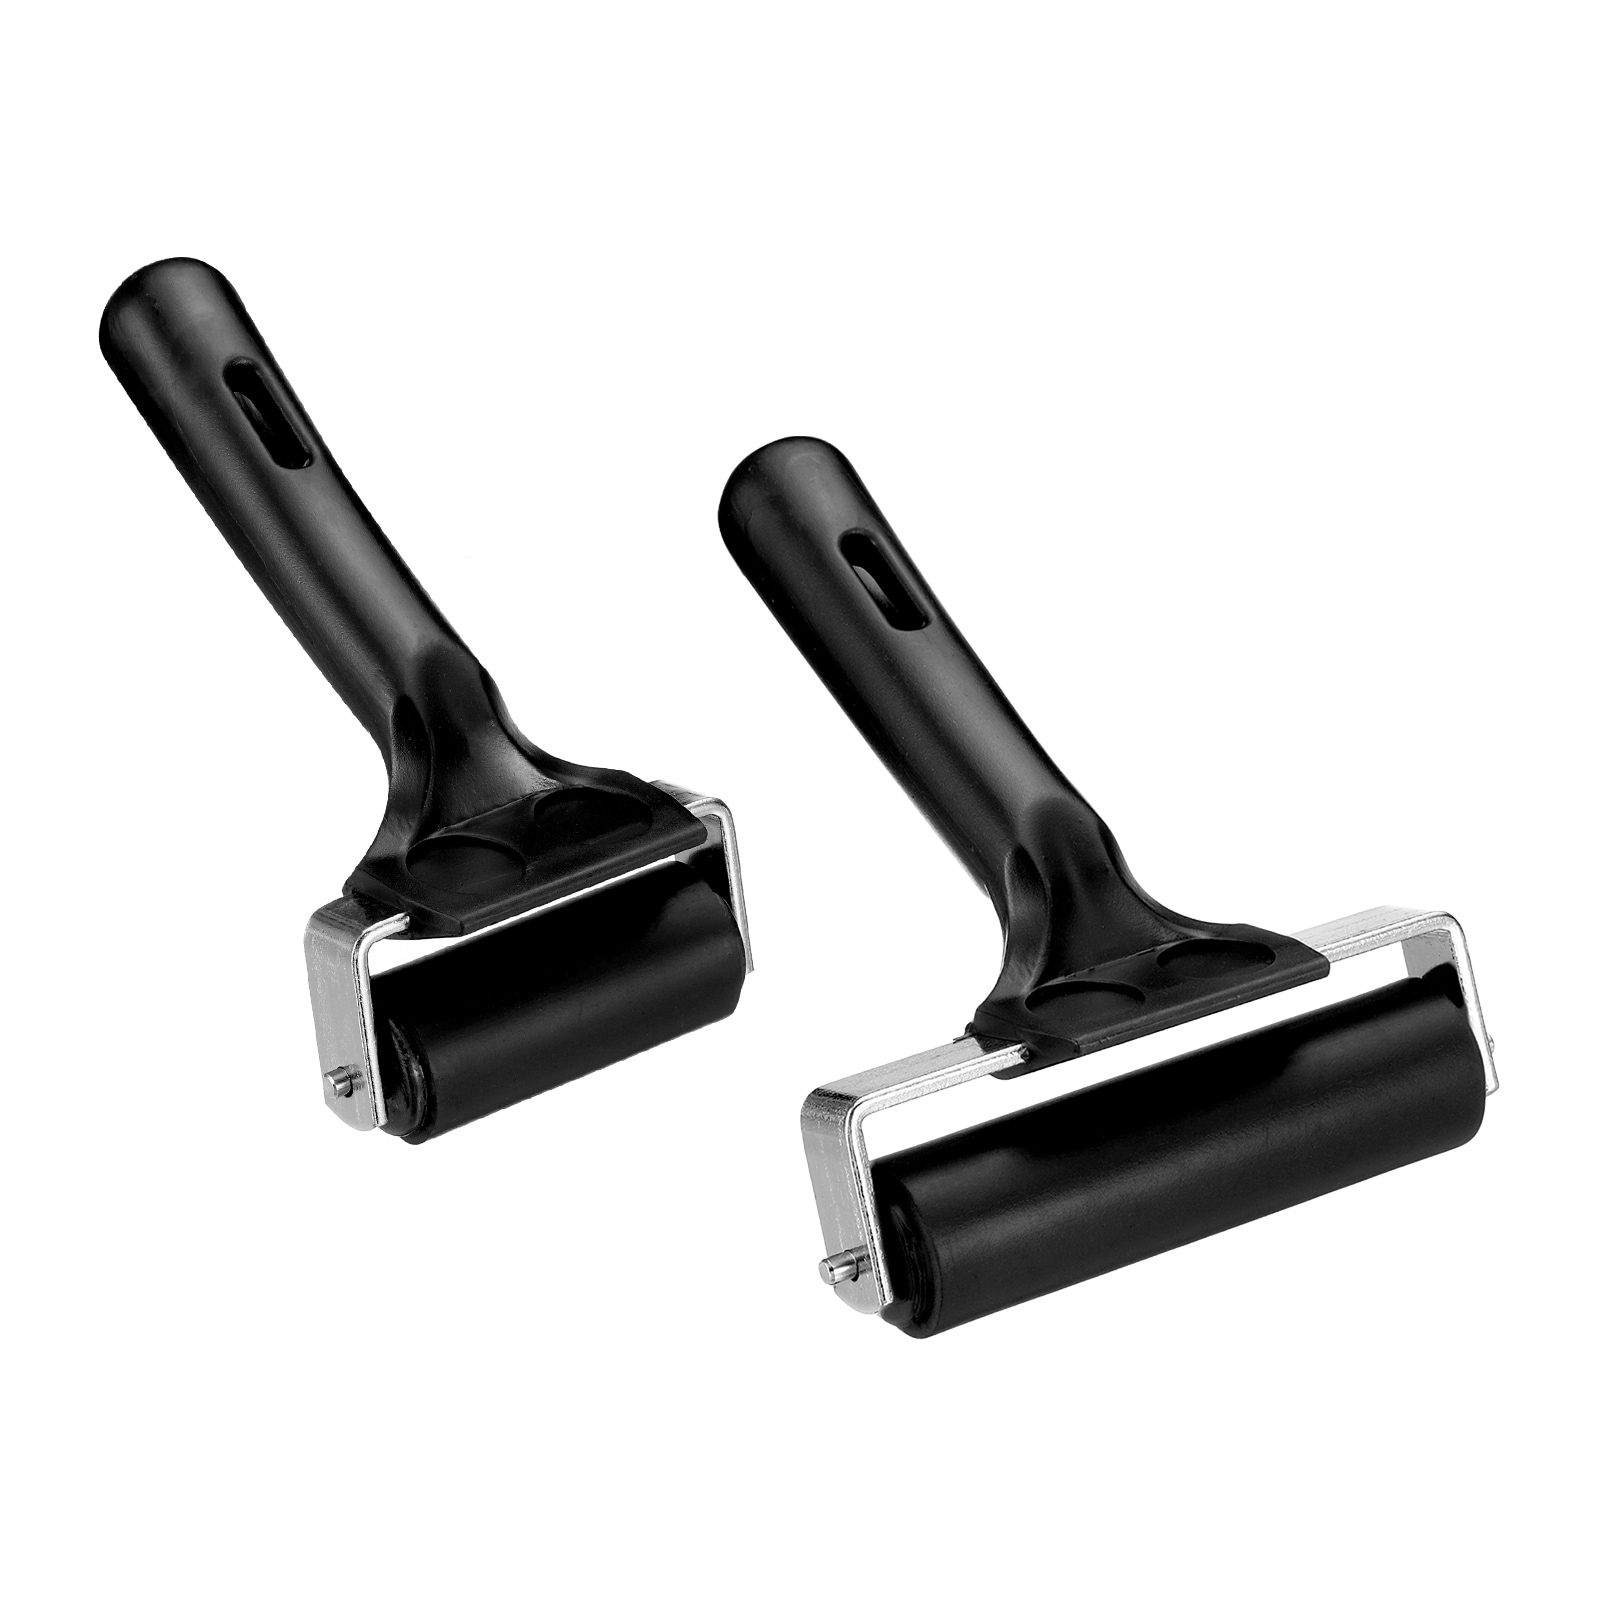  Ink Roller,2PCS Brayer Rollers for Crafting,Sturdy